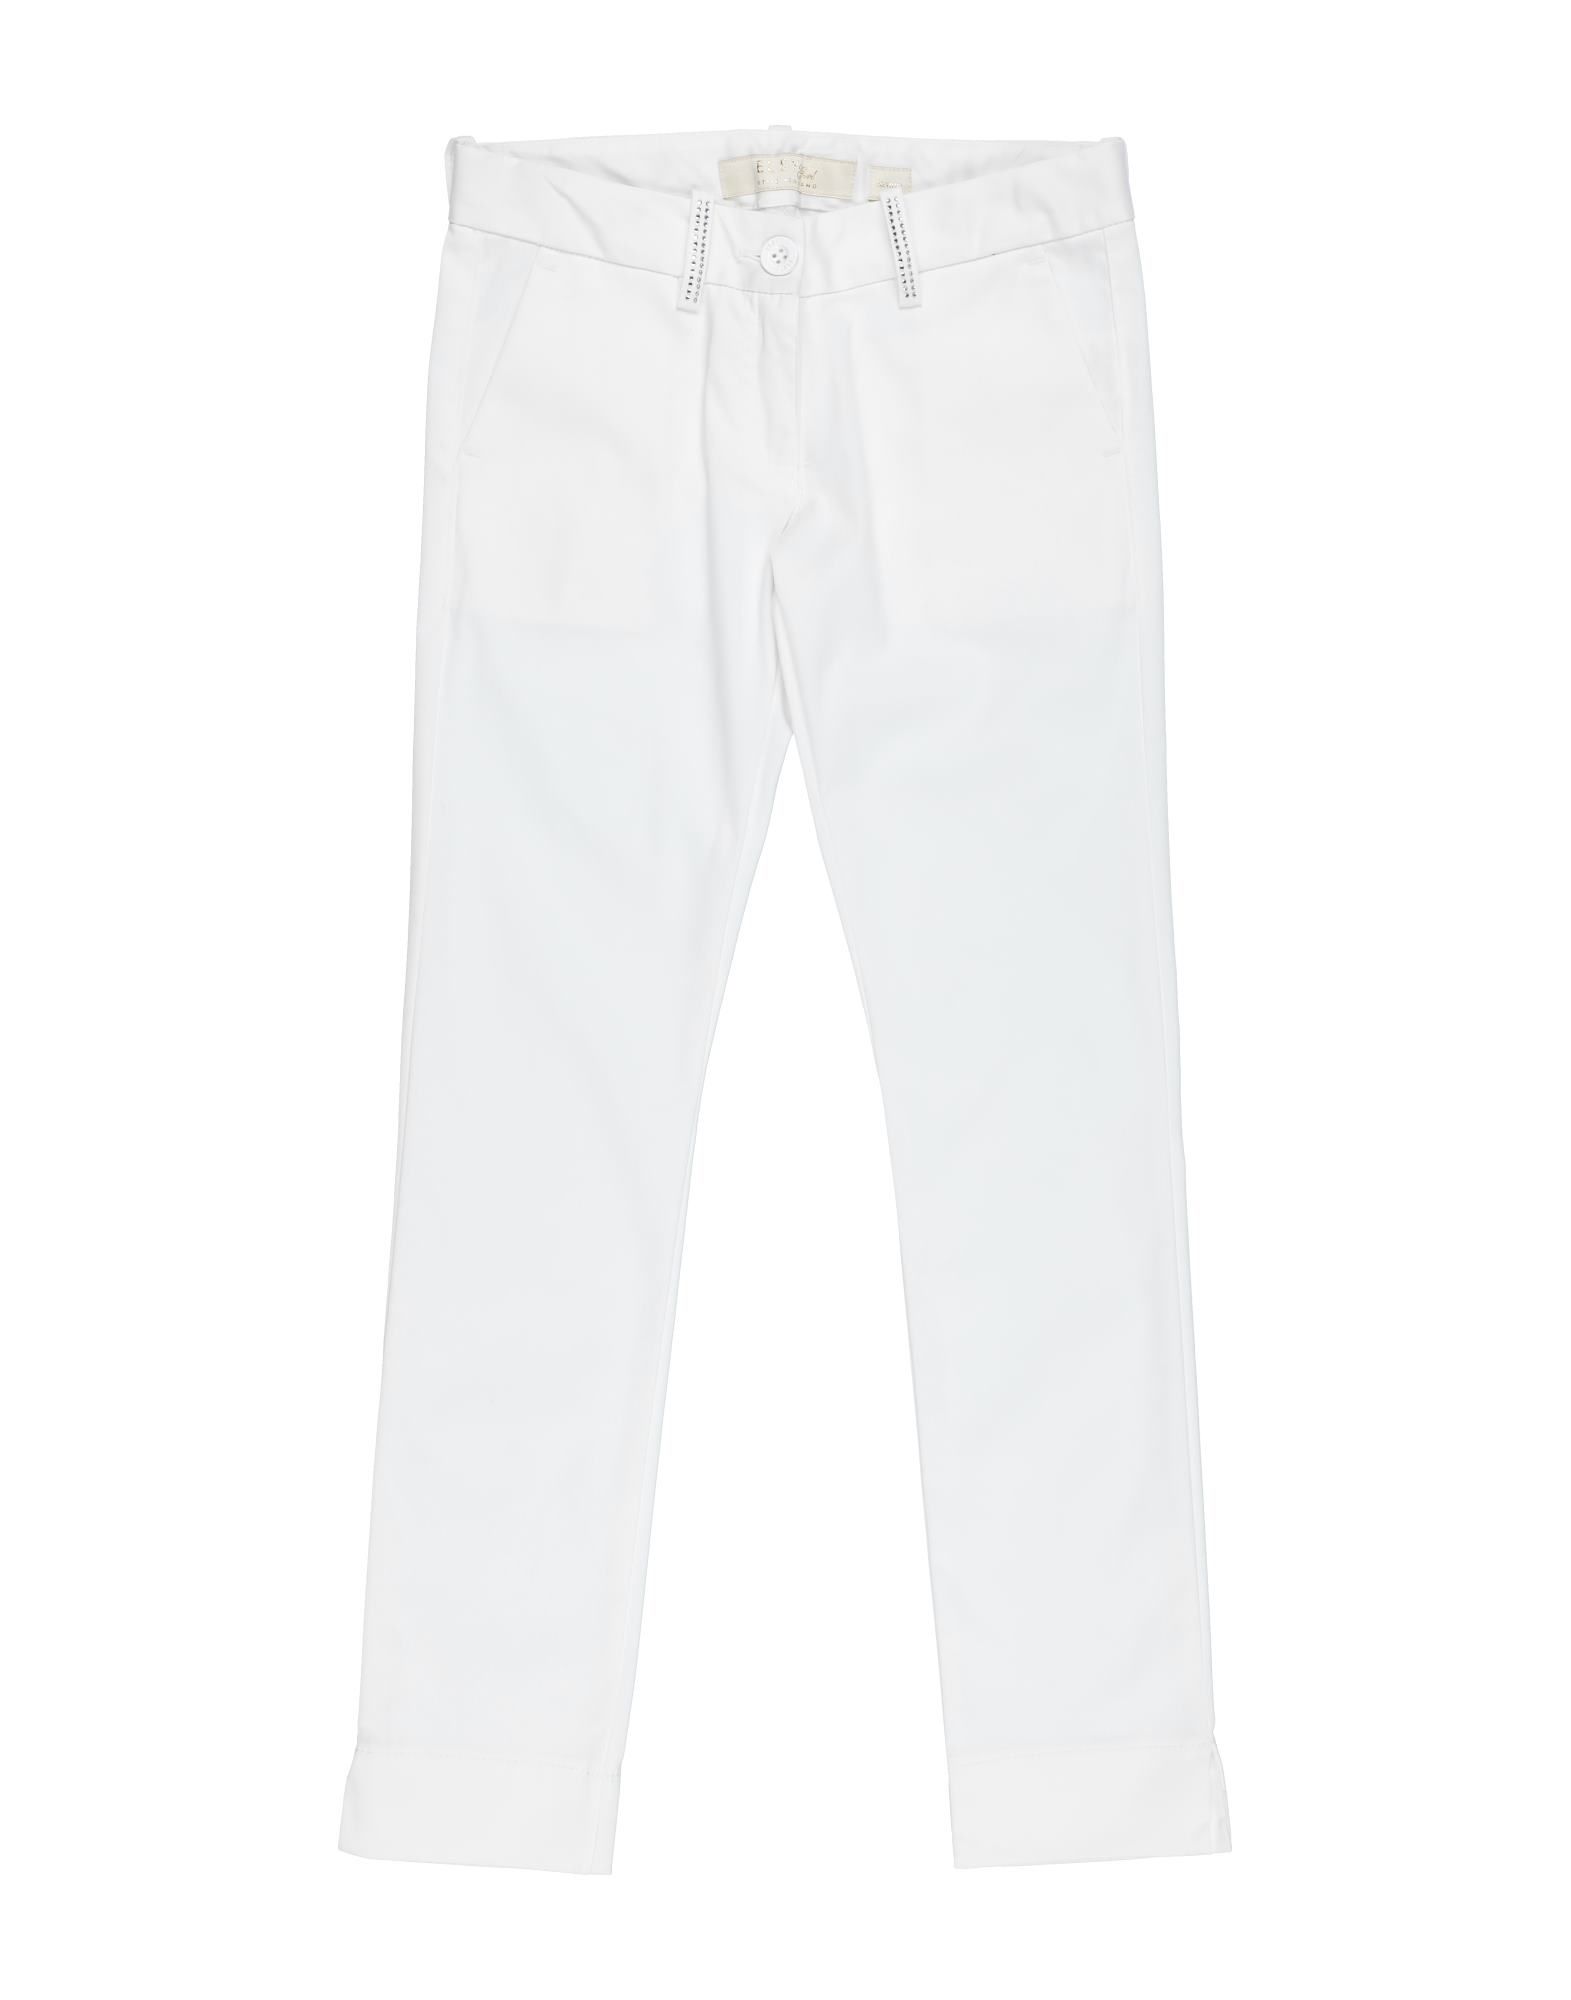 Elsy Kids' Casual Pants In White